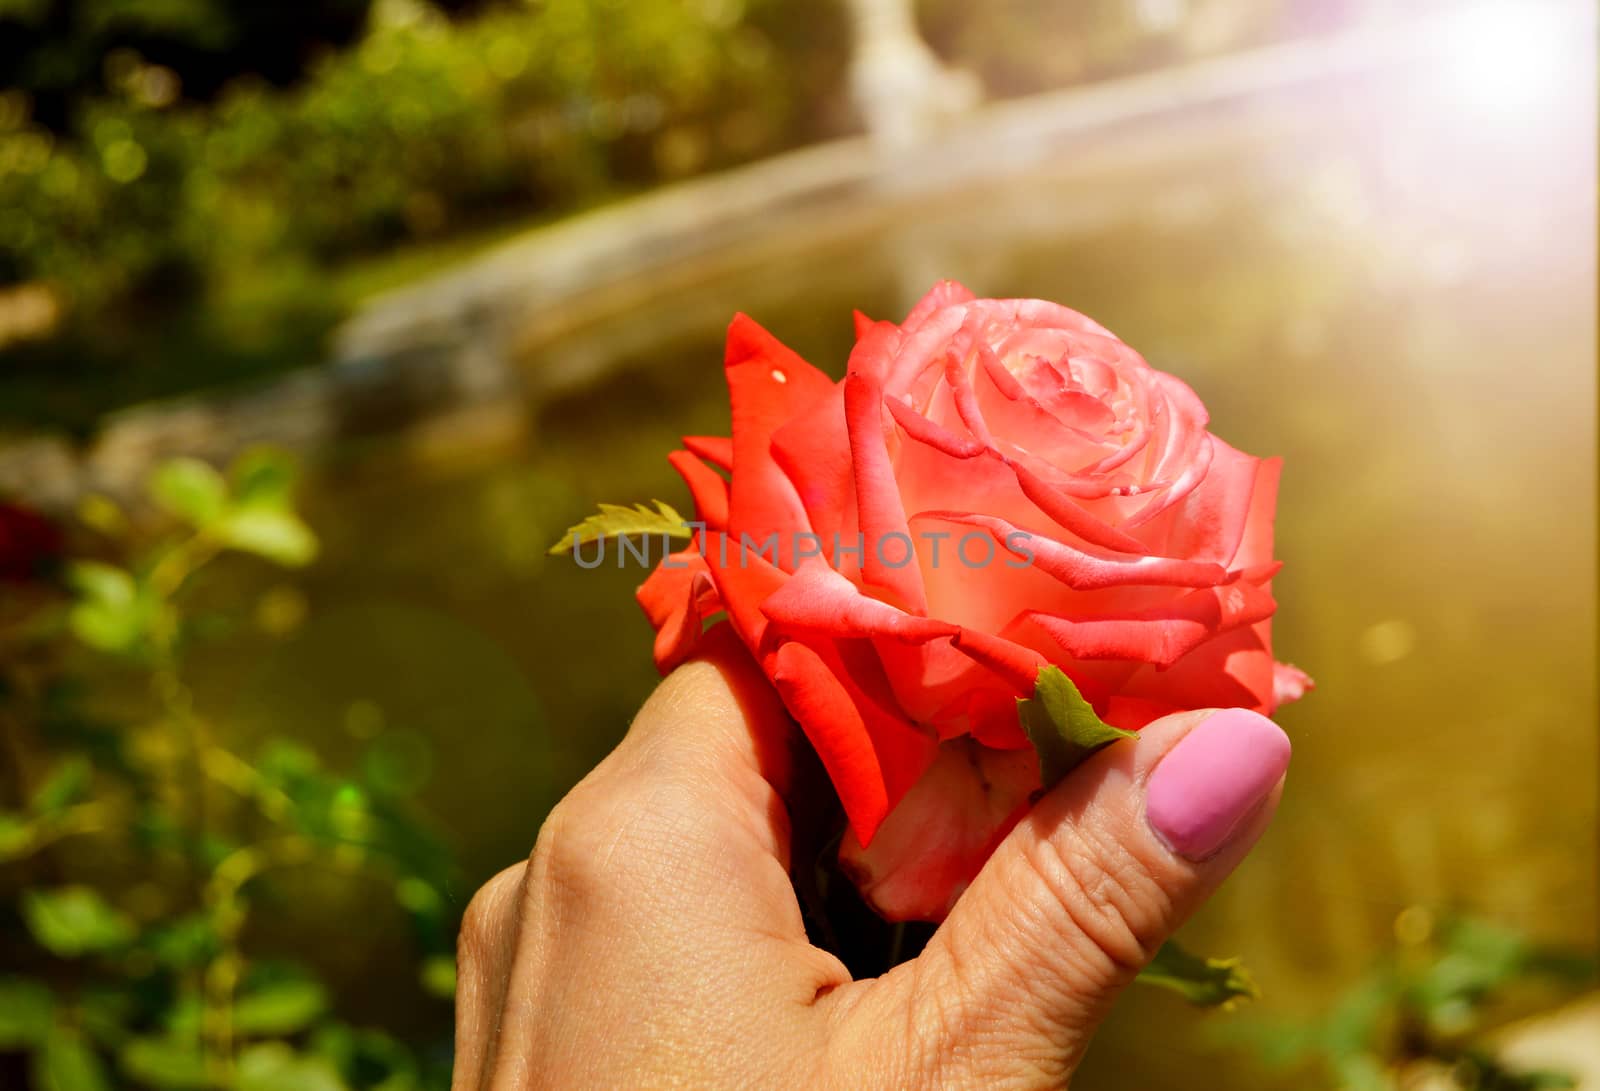 Close-up of a WOMAN's hand holding a delicate pink rose in an outdoor garden on a Sunny summer day.